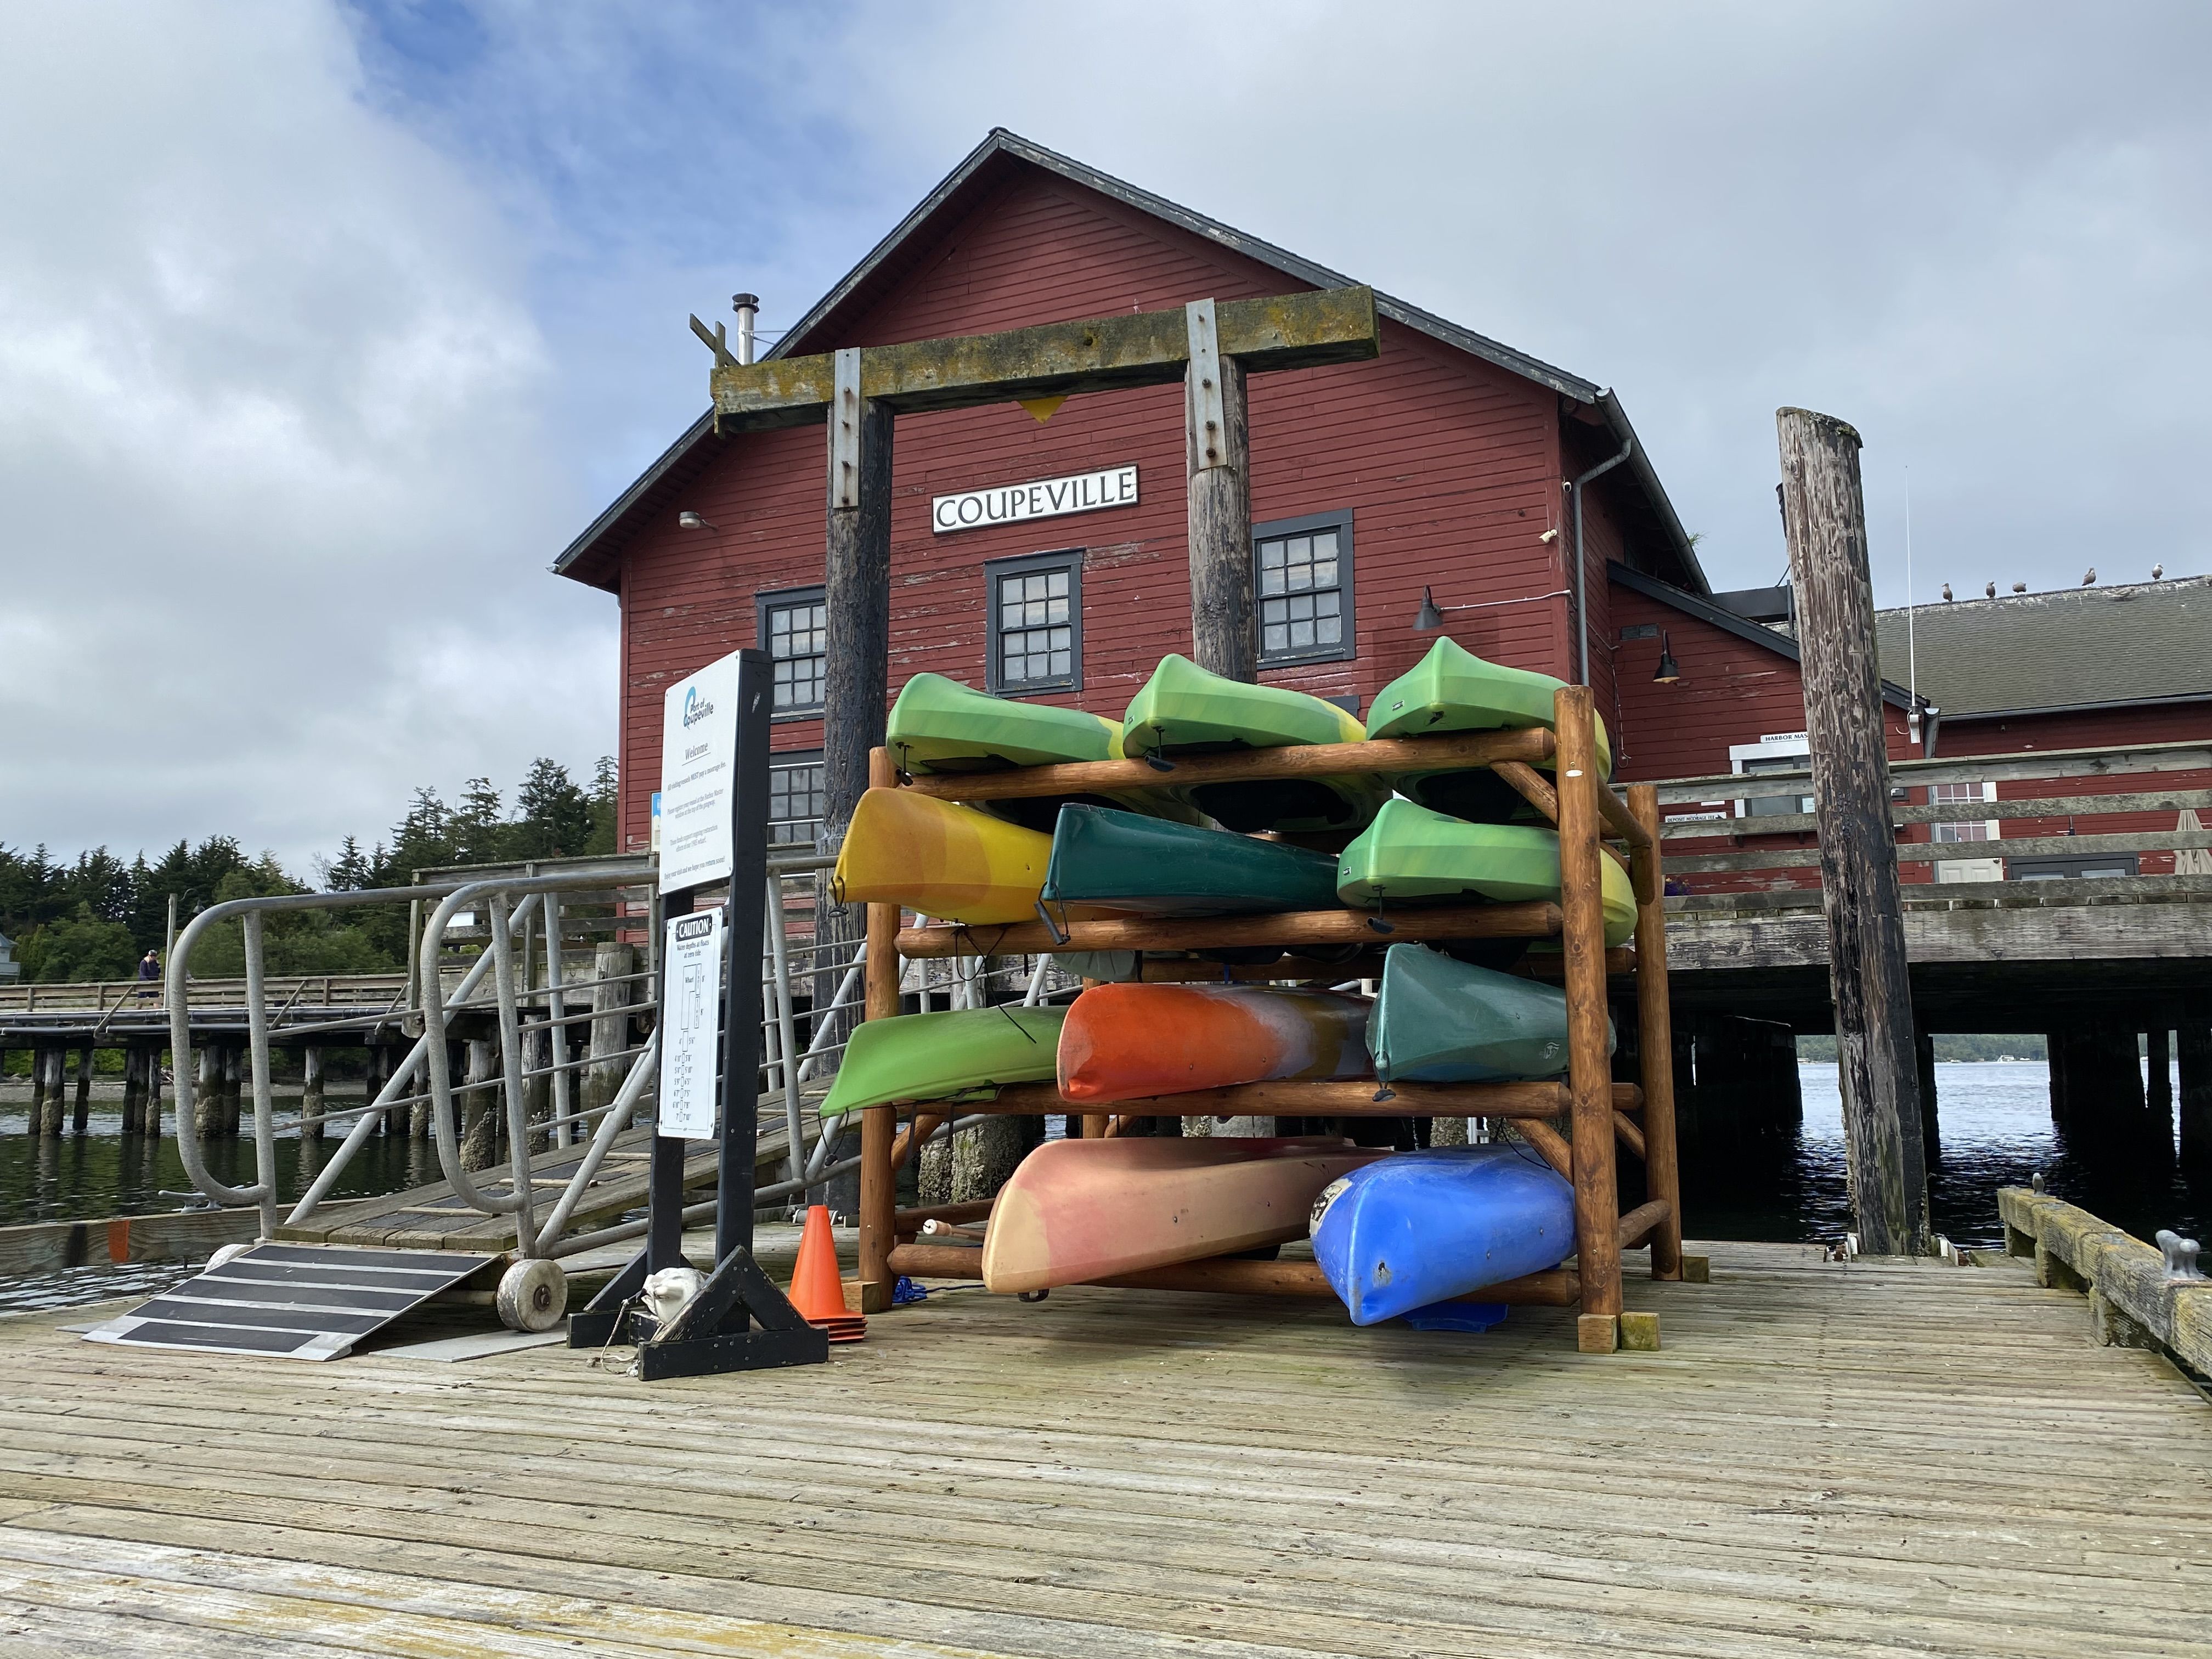 A red wharf building labeled "Coupeville" with colorful canoes and kayaks on a rack in front. 